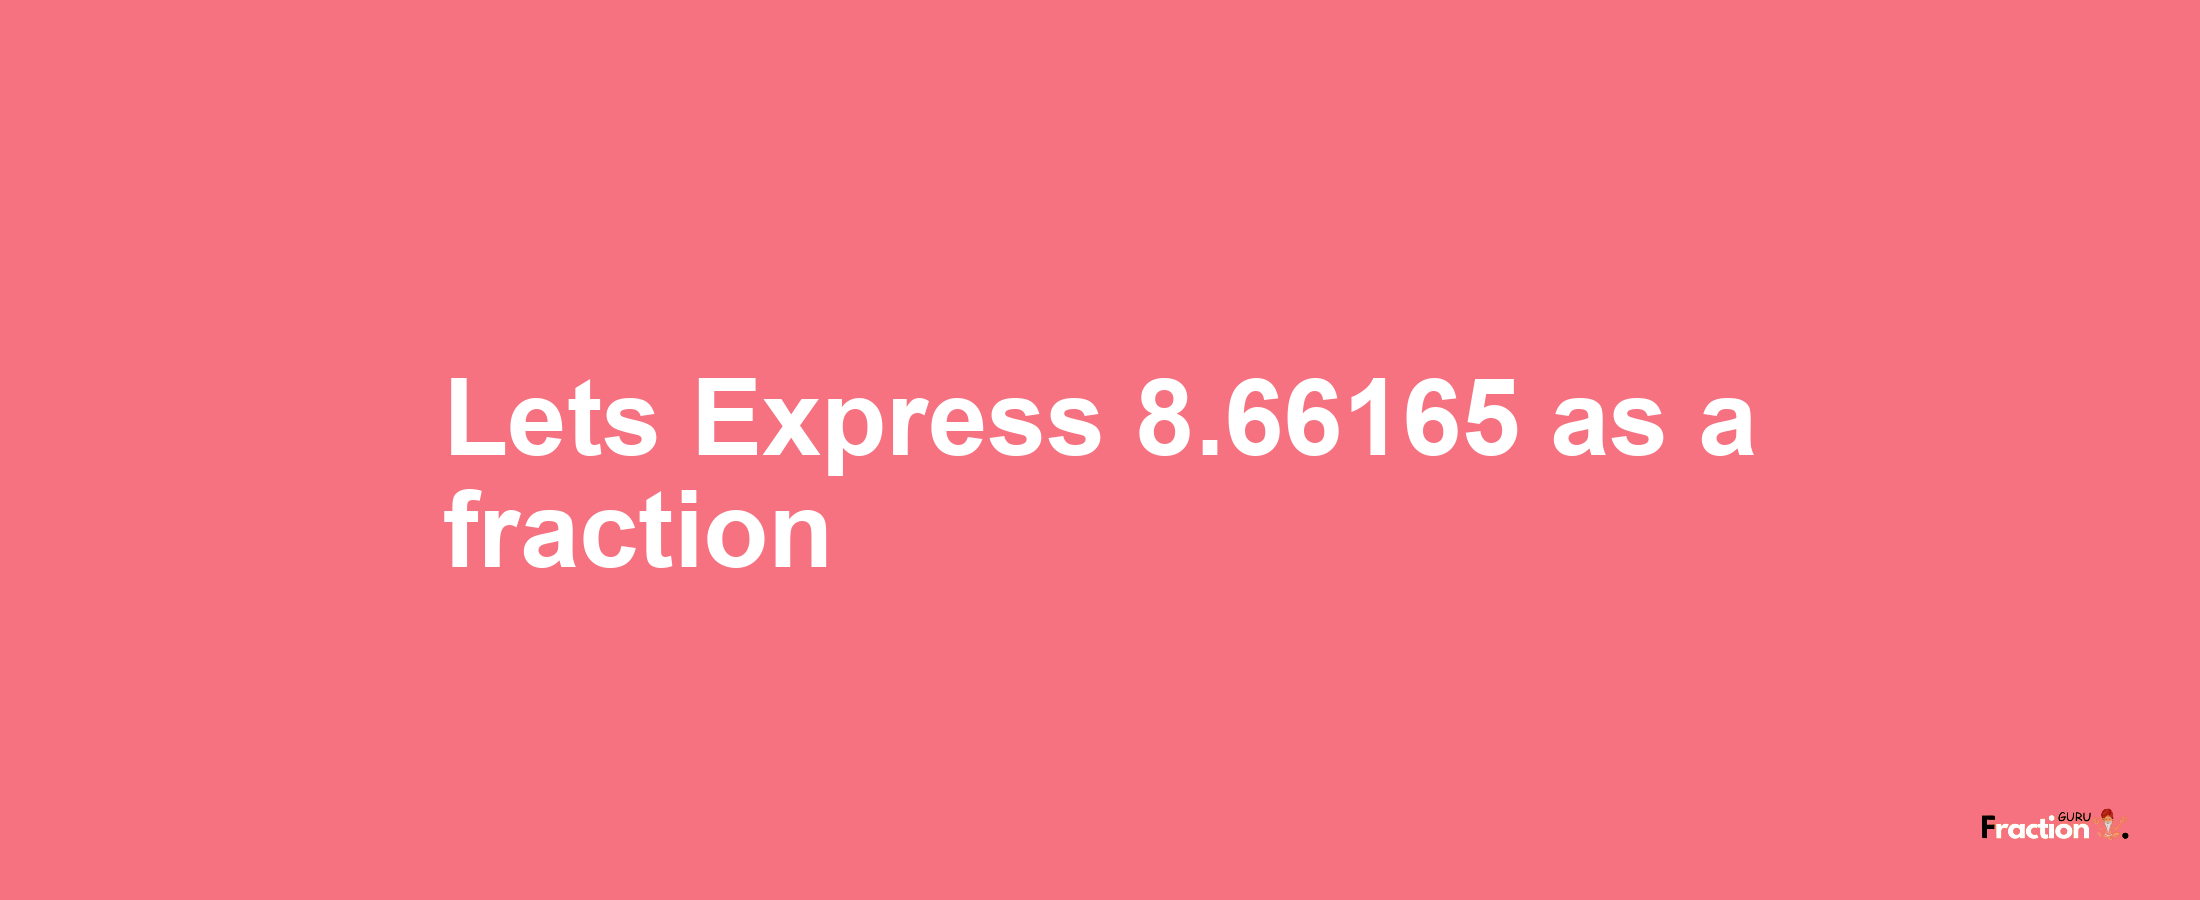 Lets Express 8.66165 as afraction